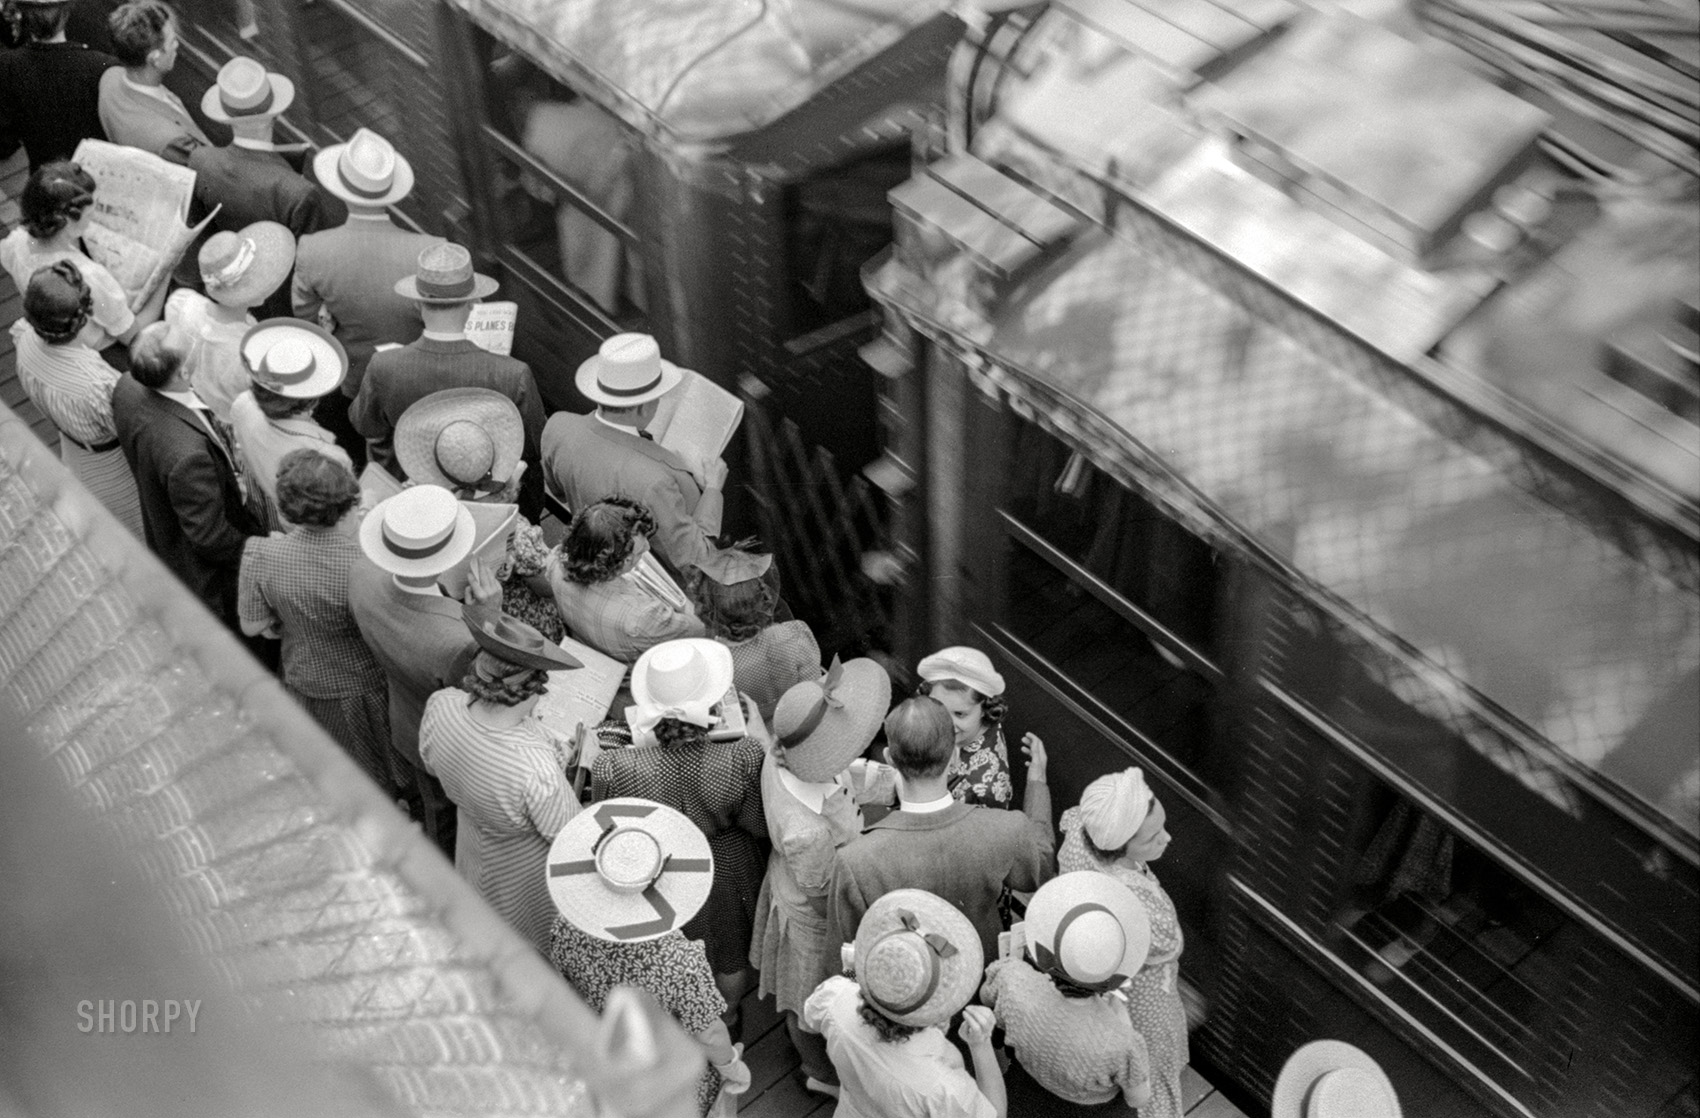 July 1941. "Chicago, Illinois. Commuters waiting for southbound trains." 35mm acetate negative by John Vachon for the Farm Security Administration. View full size.